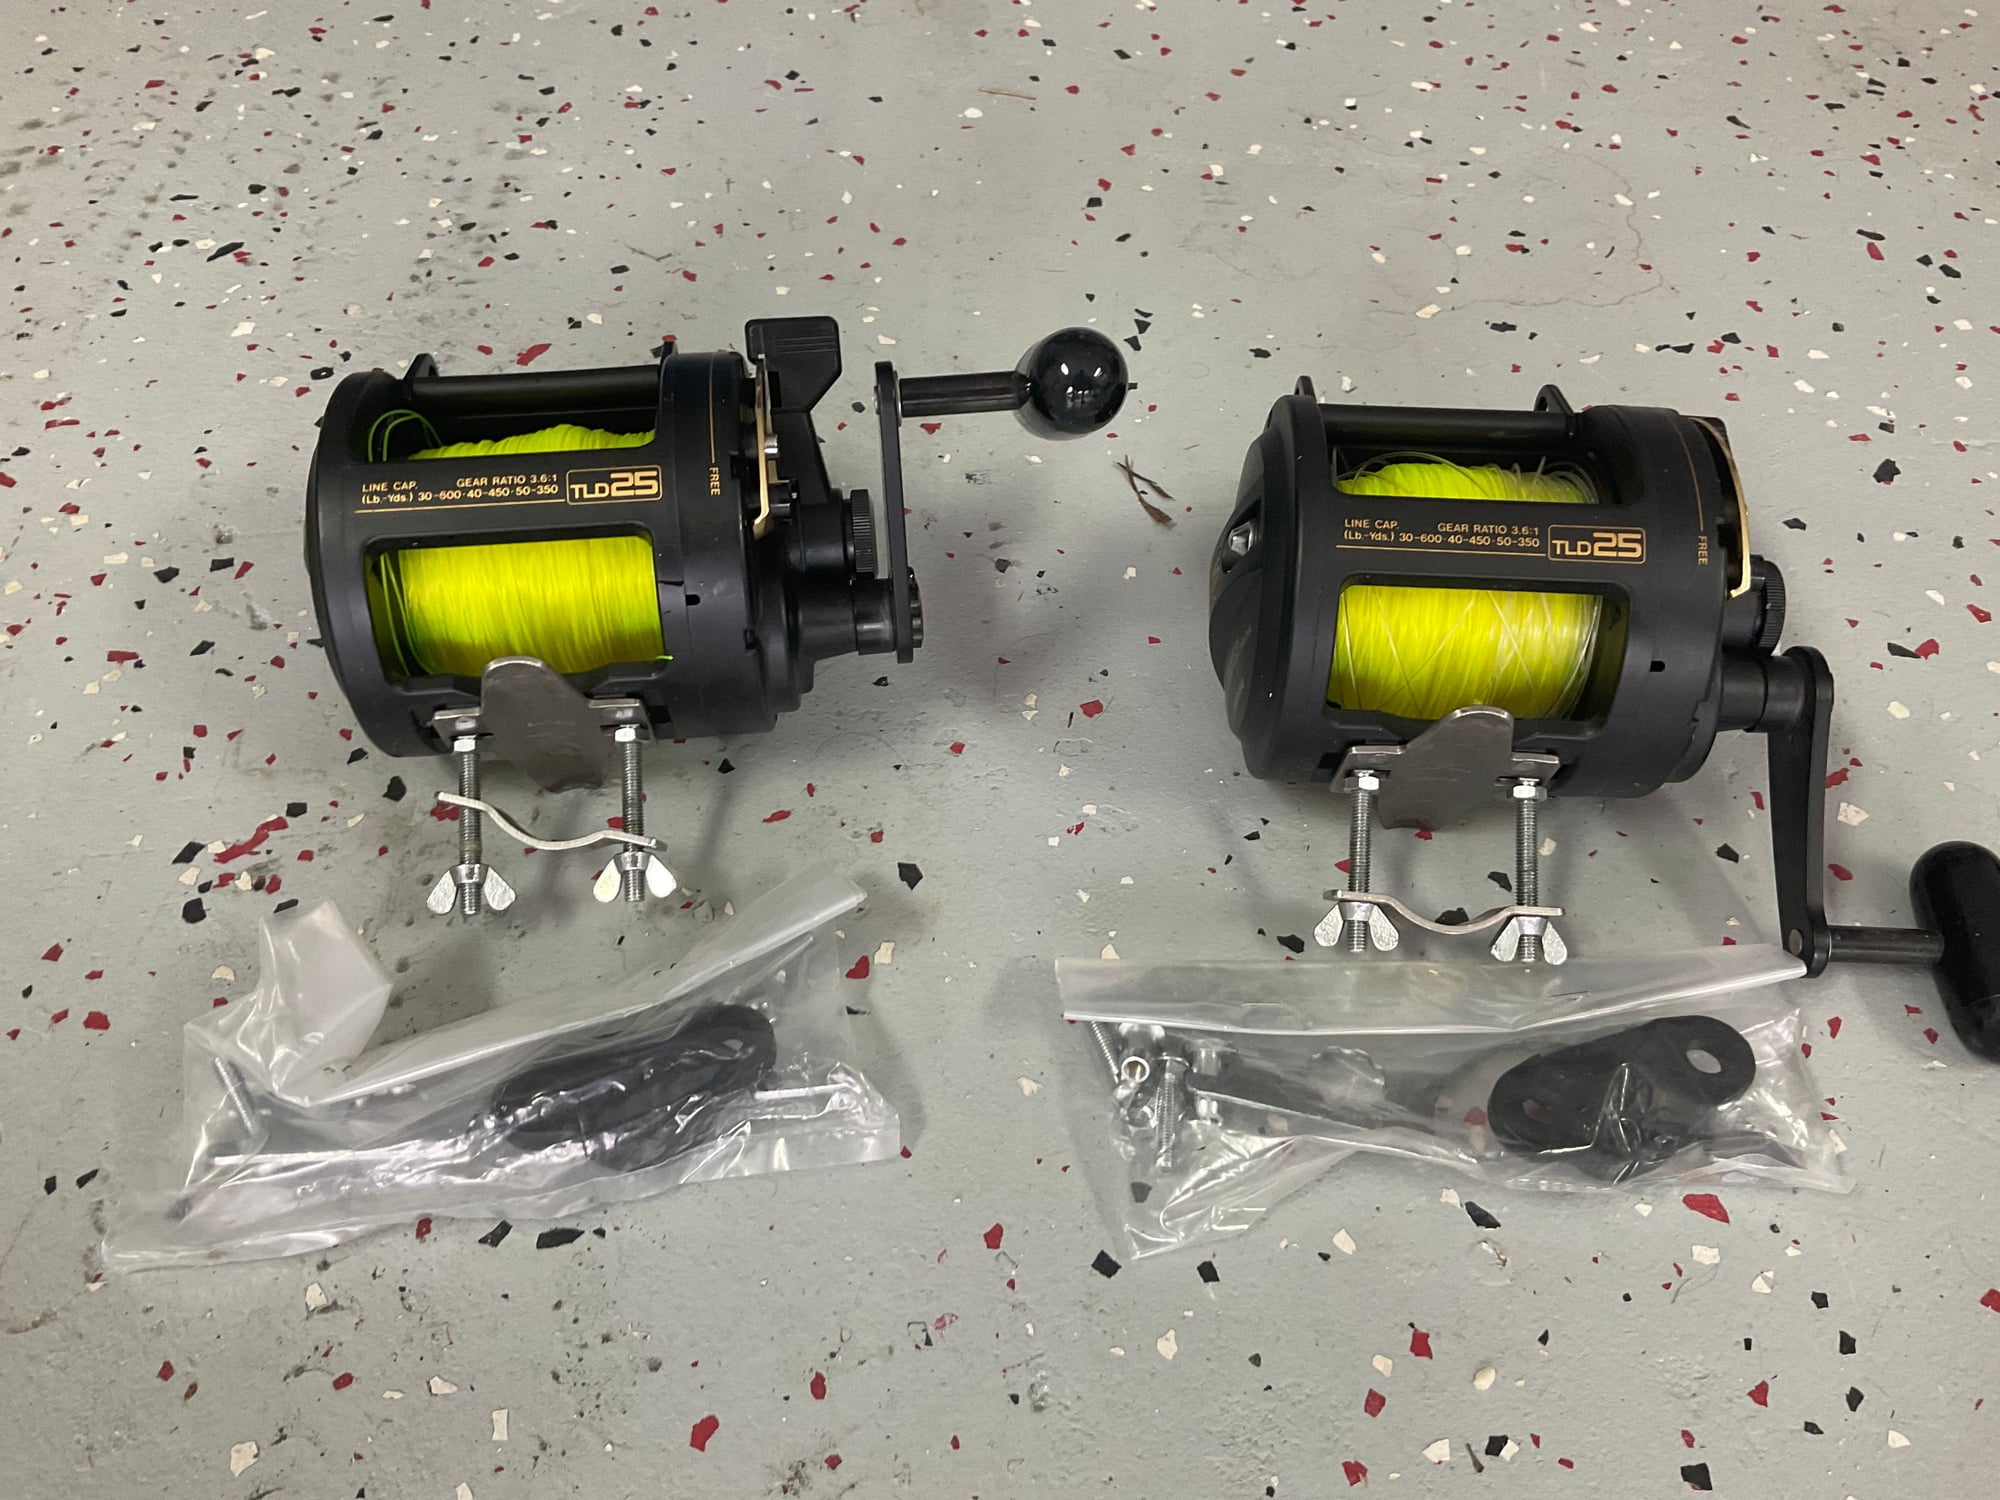 For Sale: Two (2) TLD 25 Reels - The Hull Truth - Boating and Fishing Forum